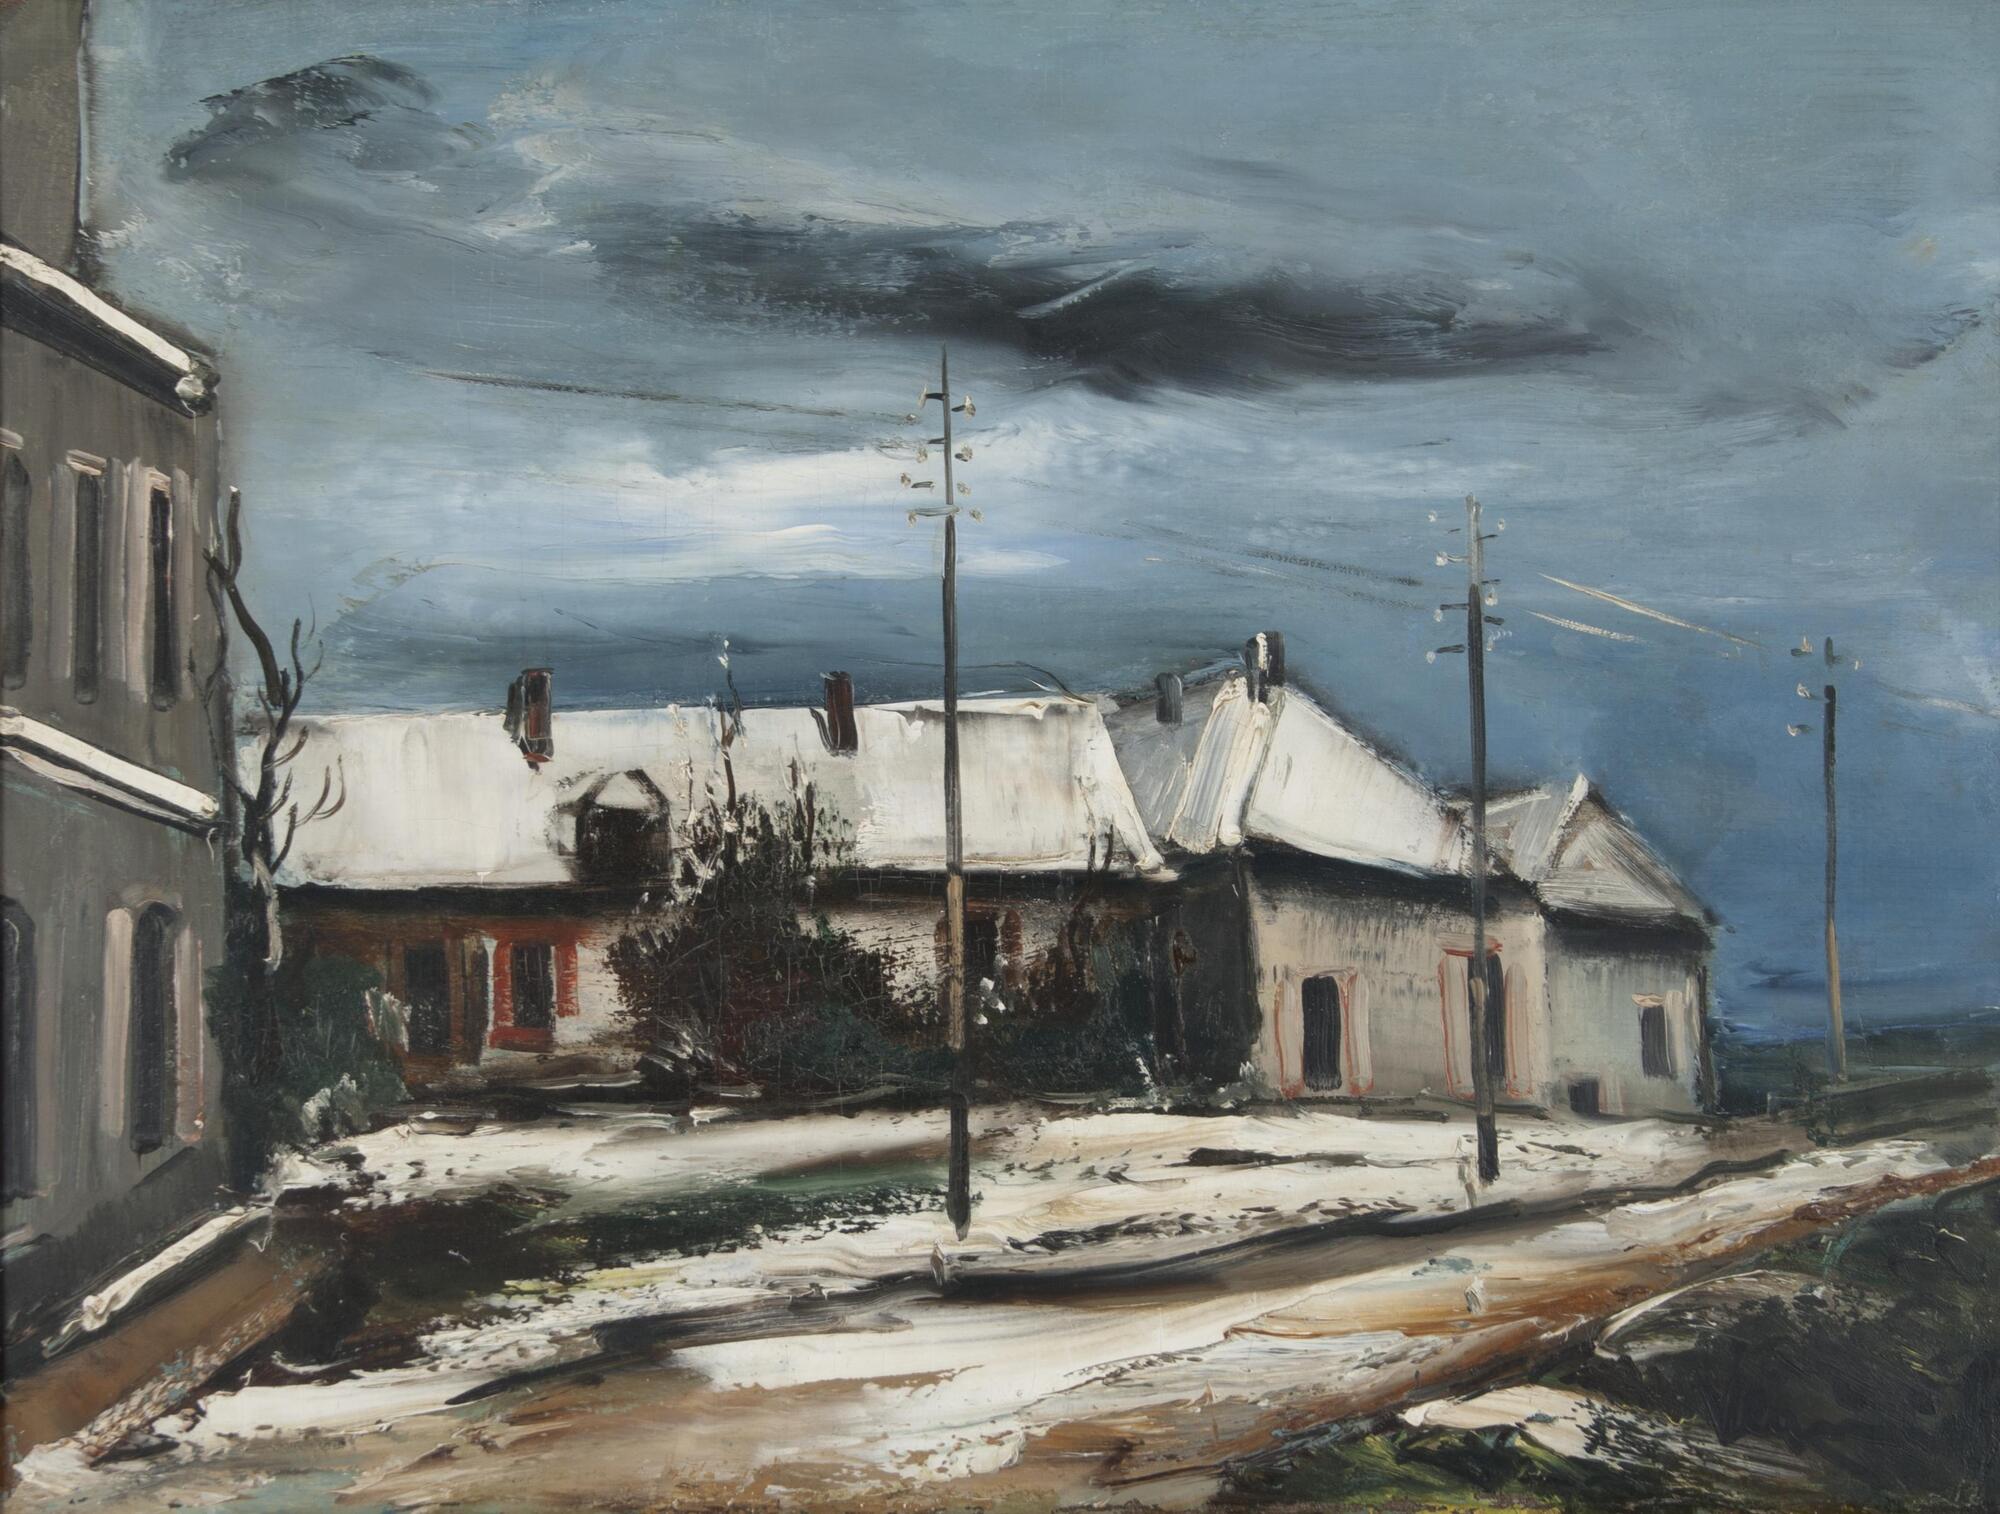 A street scene with a darkened sky and long buildings. There is snow and dust on the roads, telephone poles leading into the far distance and a low horizon line.